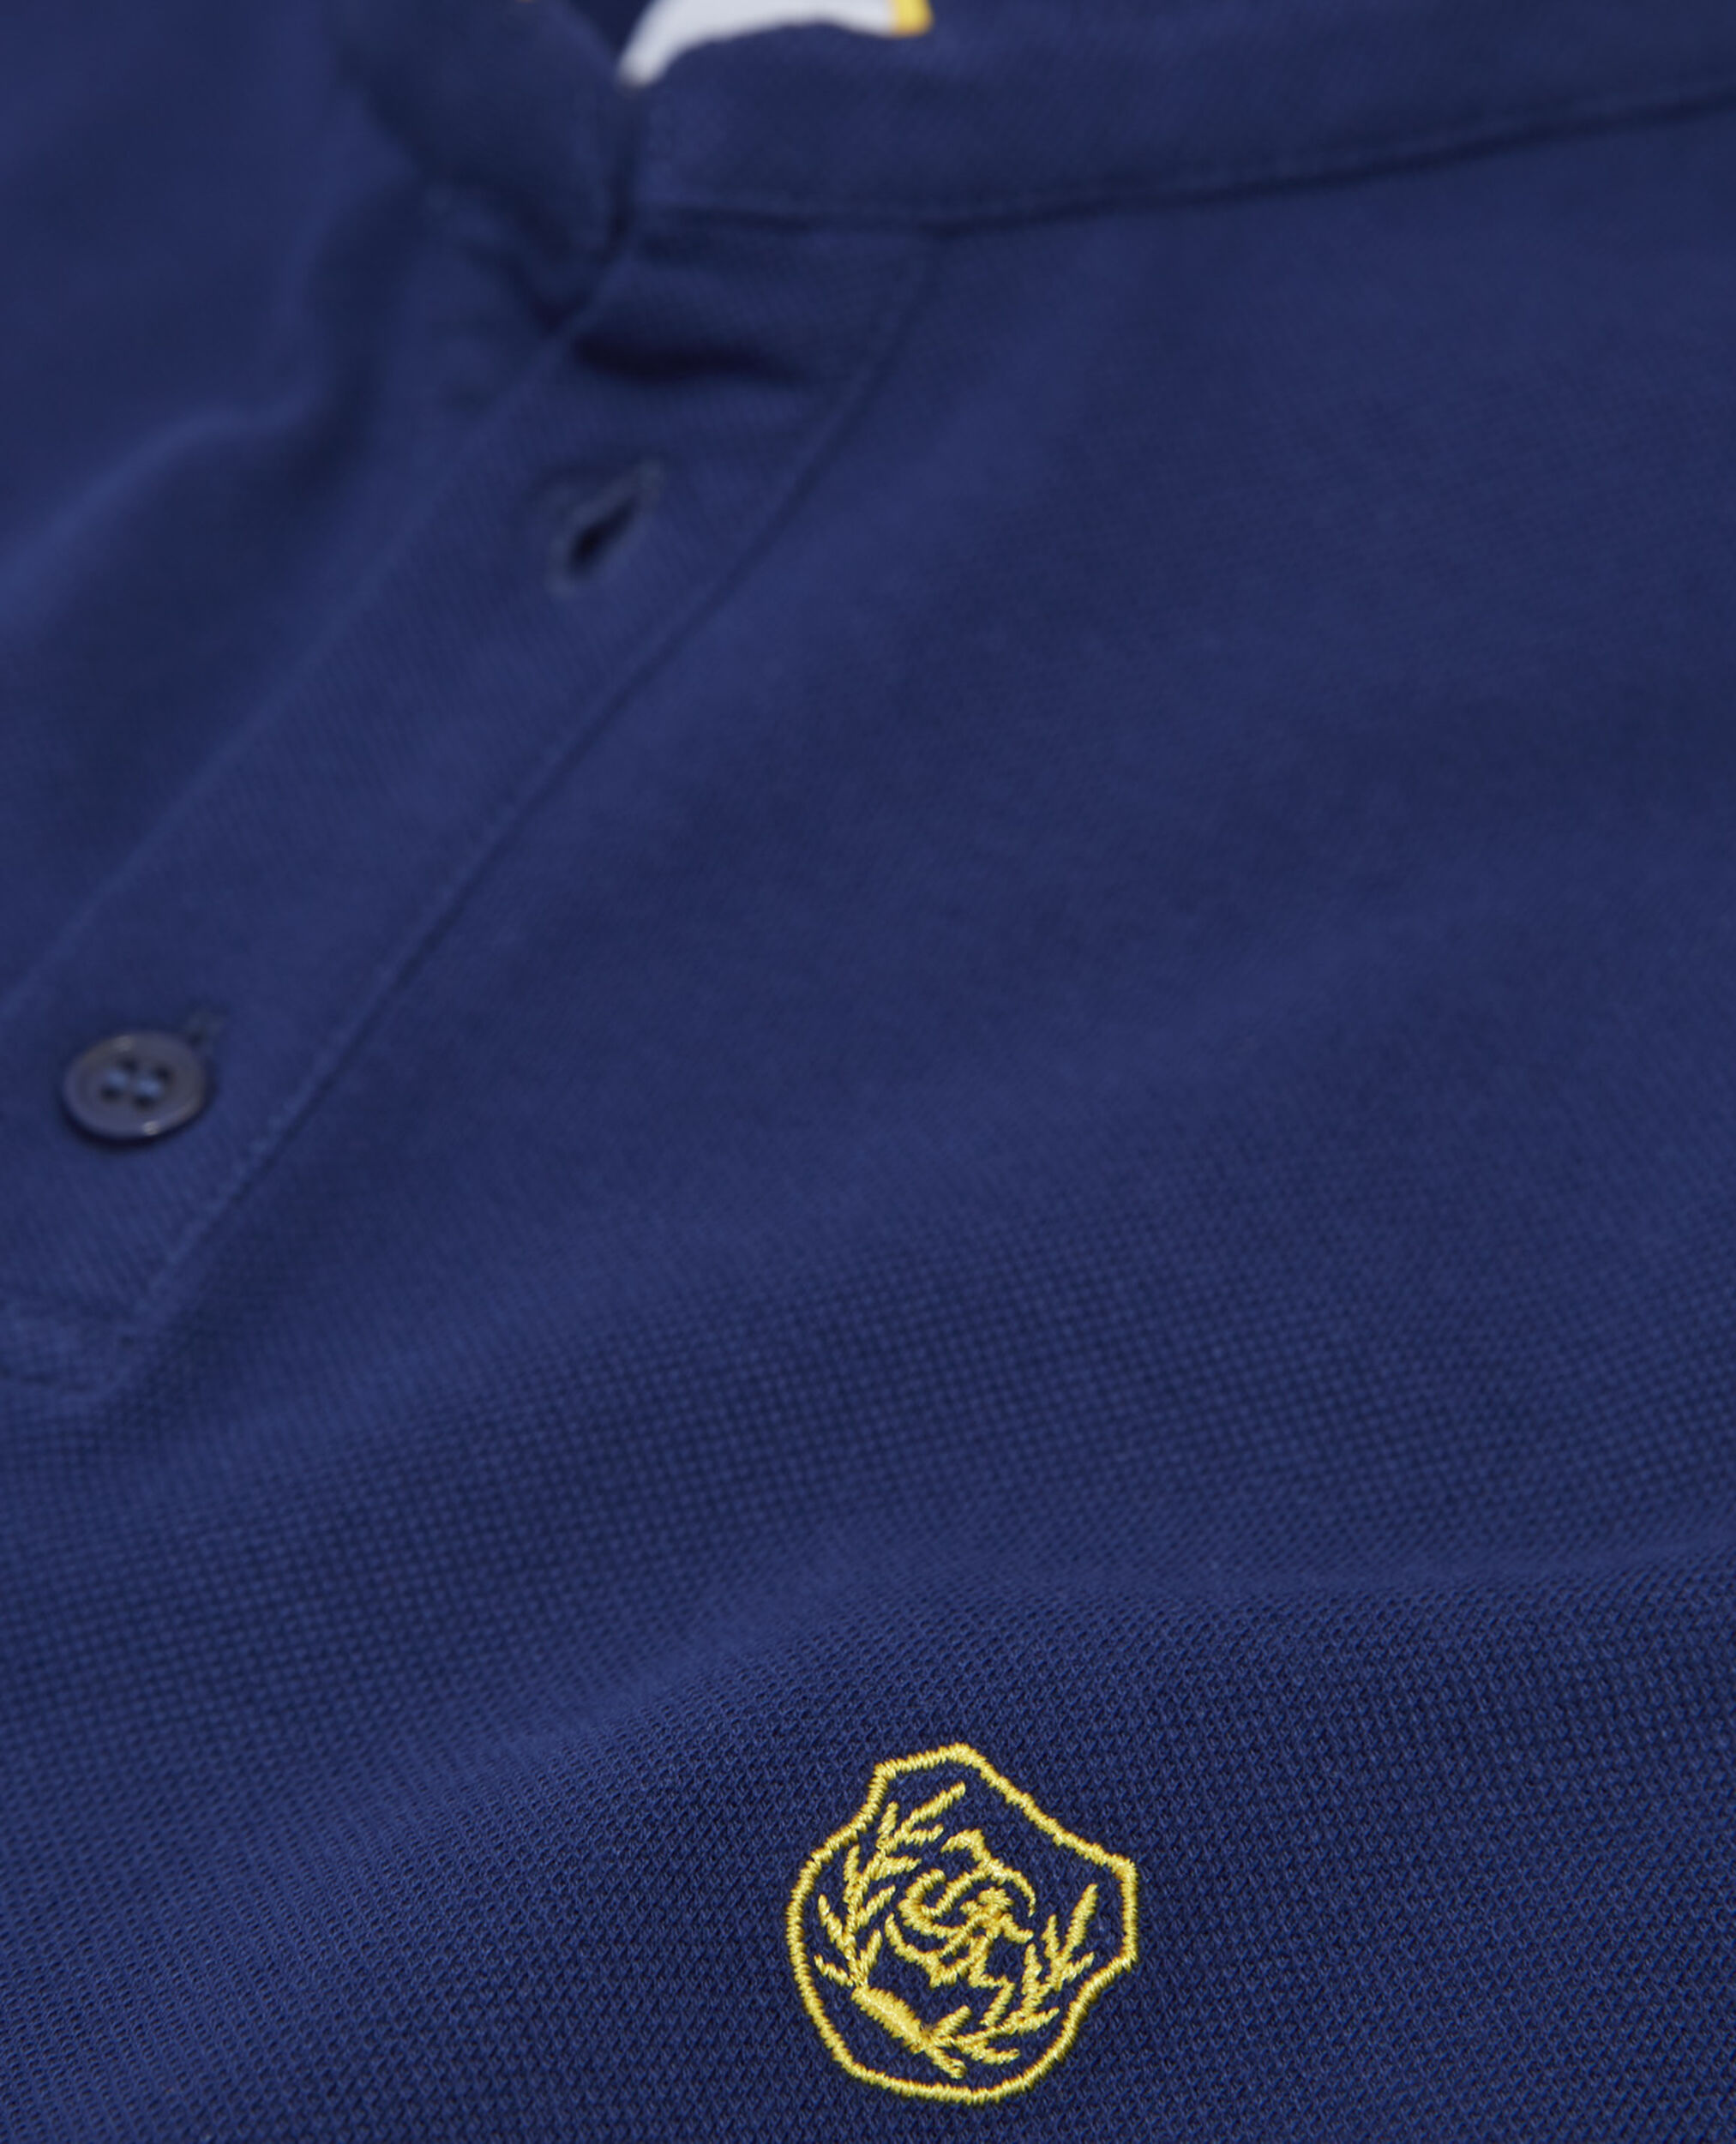 Camisa polo jersey azul marino detalles, OFFICER NVY/DANDELION YLW, hi-res image number null